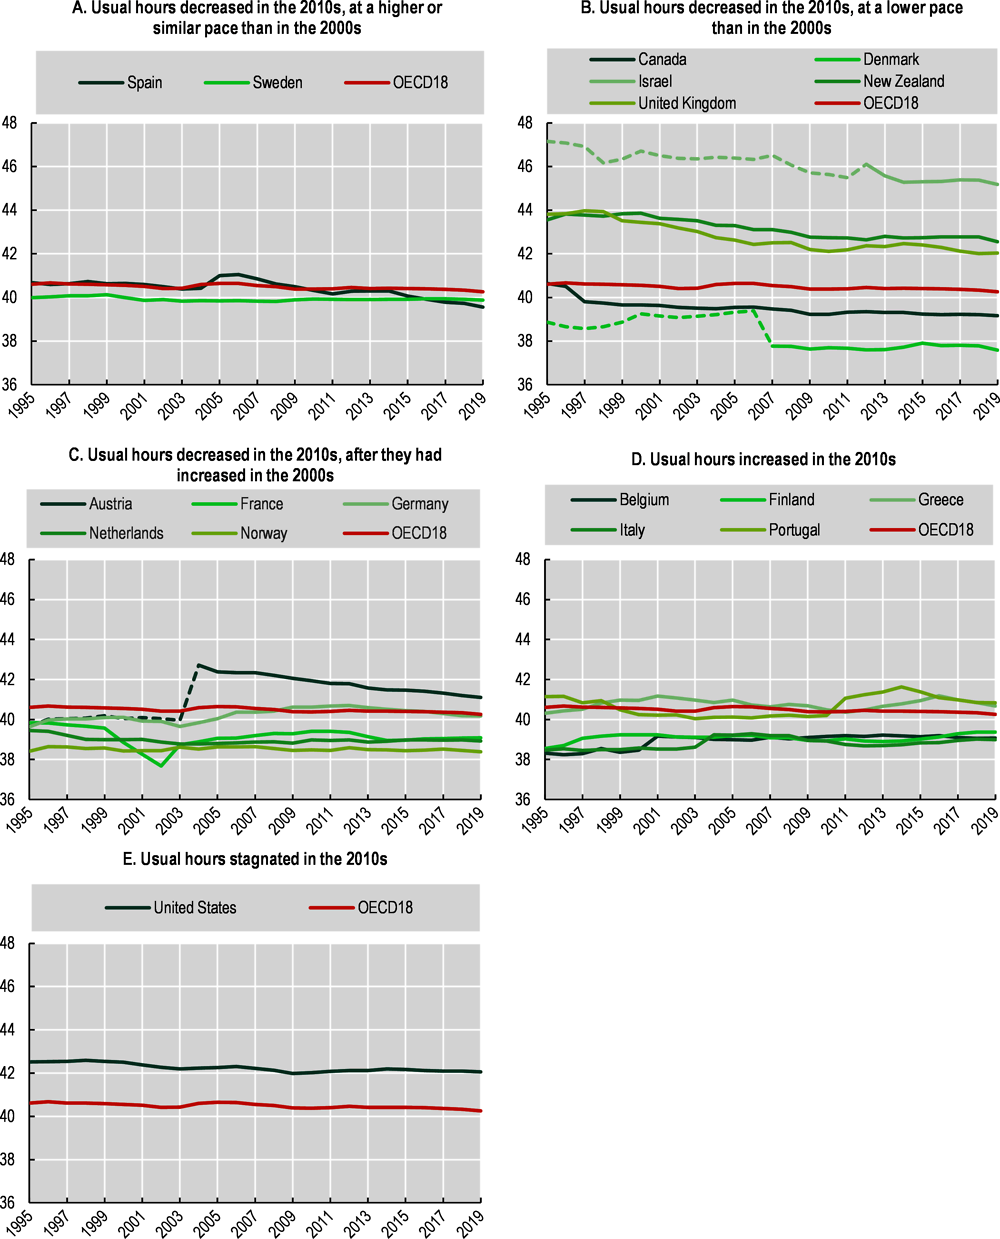 Annex Figure 5.A.3. Trends in average weekly hours usually worked per full-time employee in OECD countries, 1995-2019